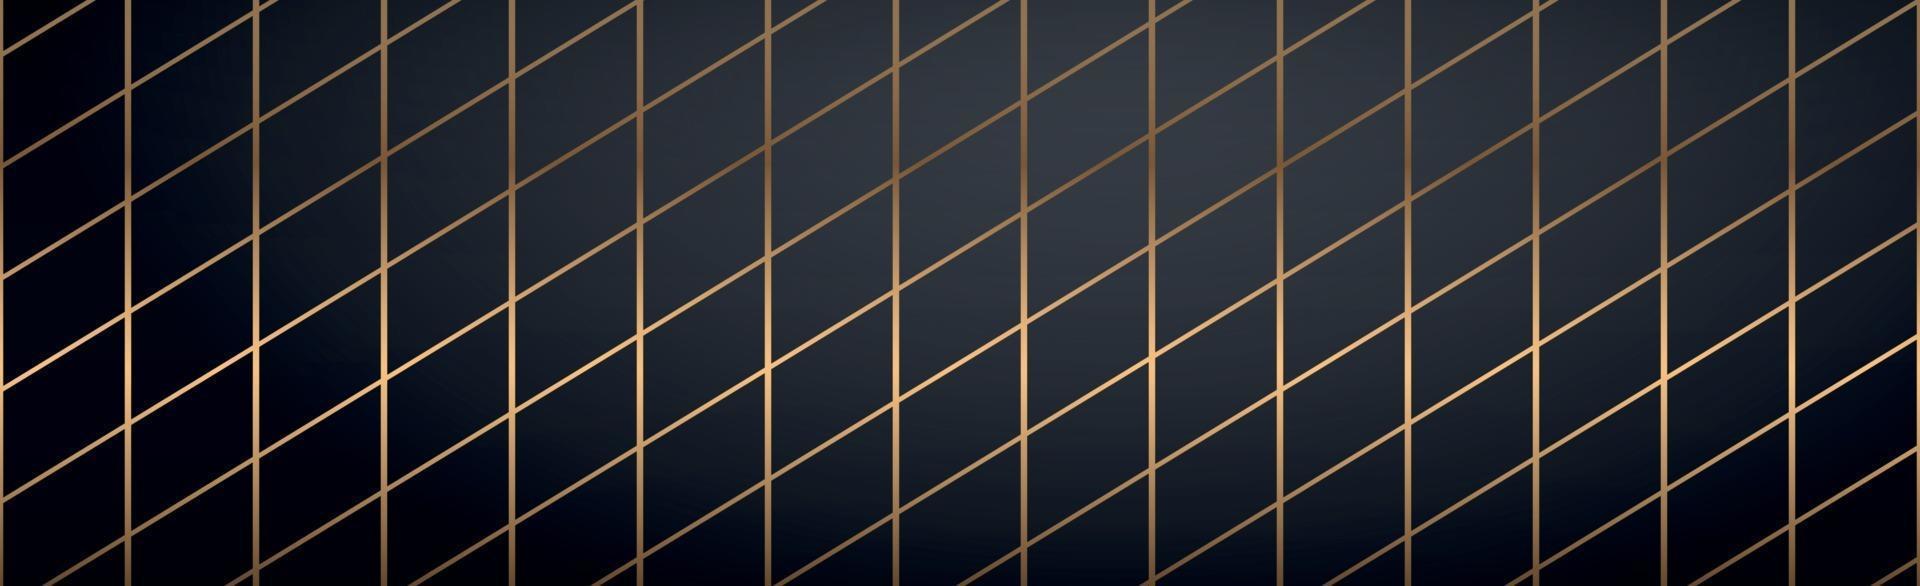 Abstract golden lines on a black background - Vector